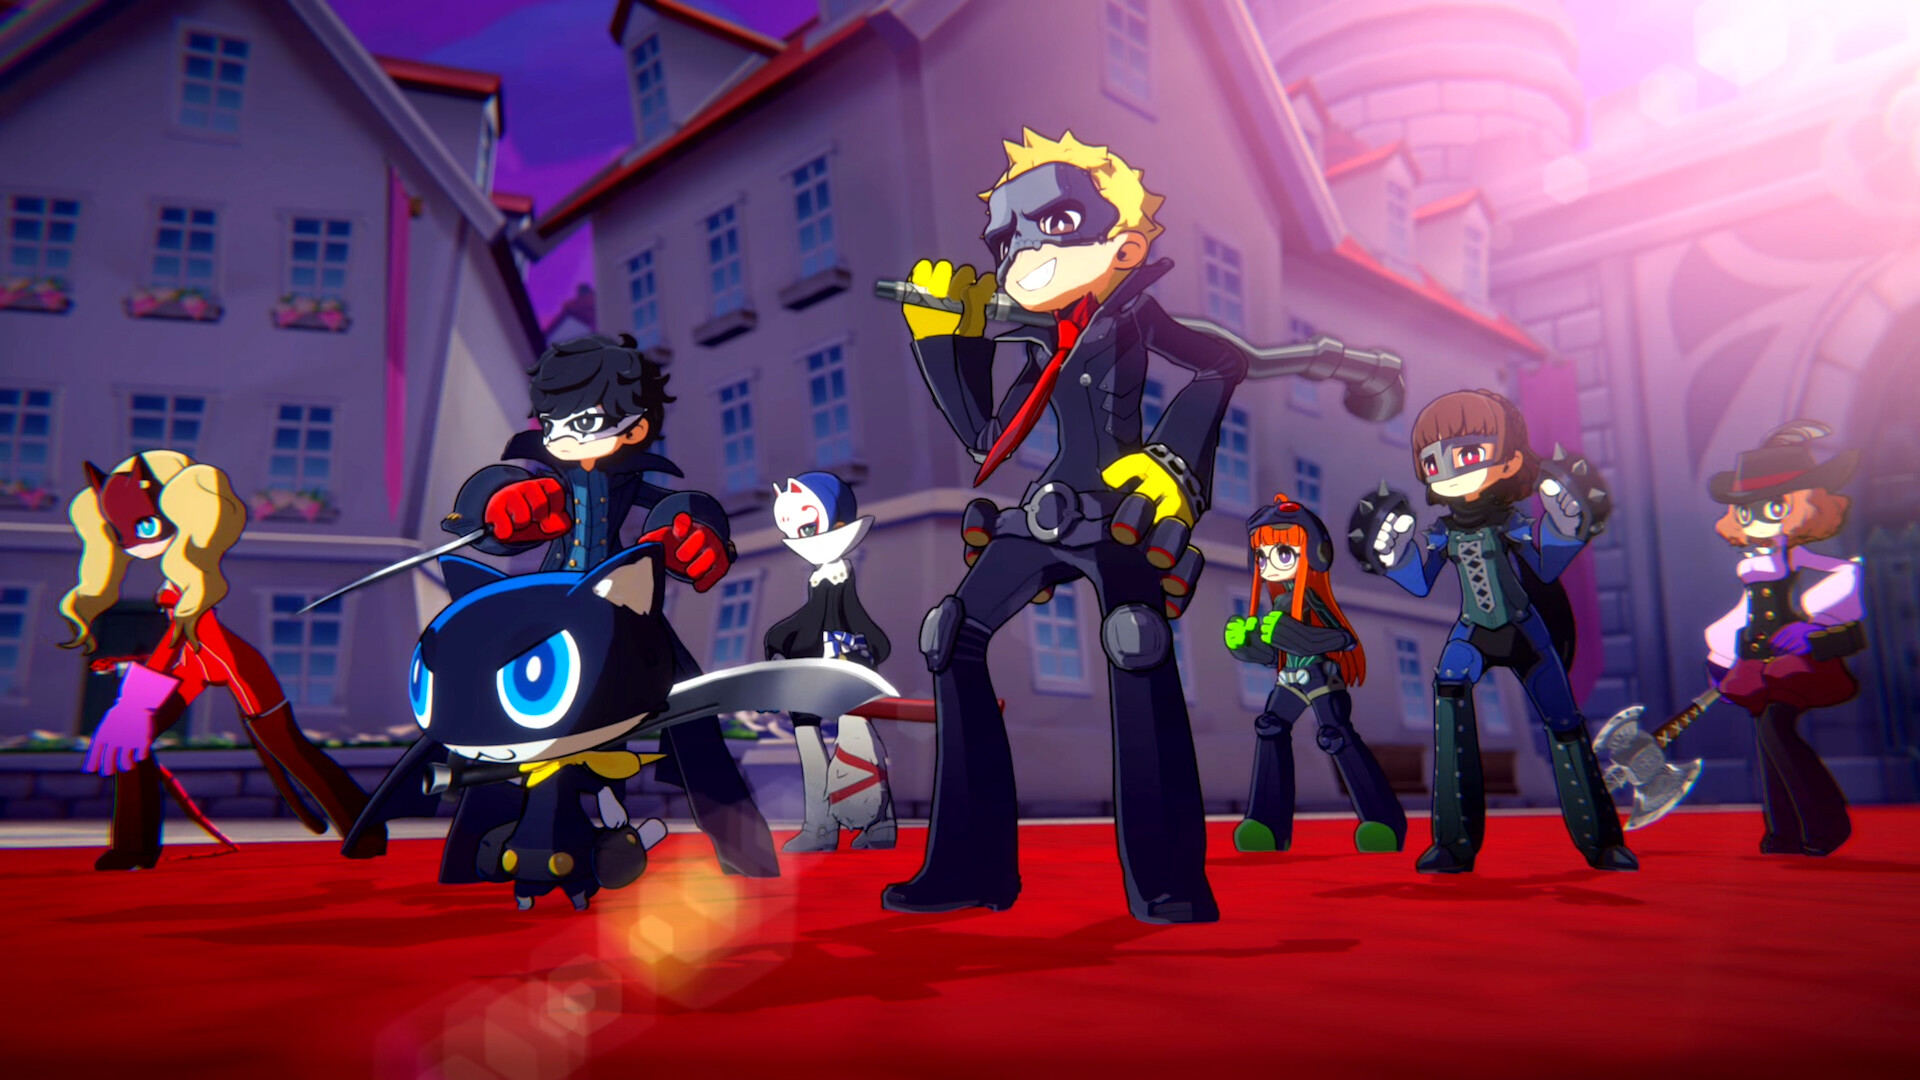 Persona 5 Tactica - Digital Deluxe Edition Steam Key for PC - Buy now